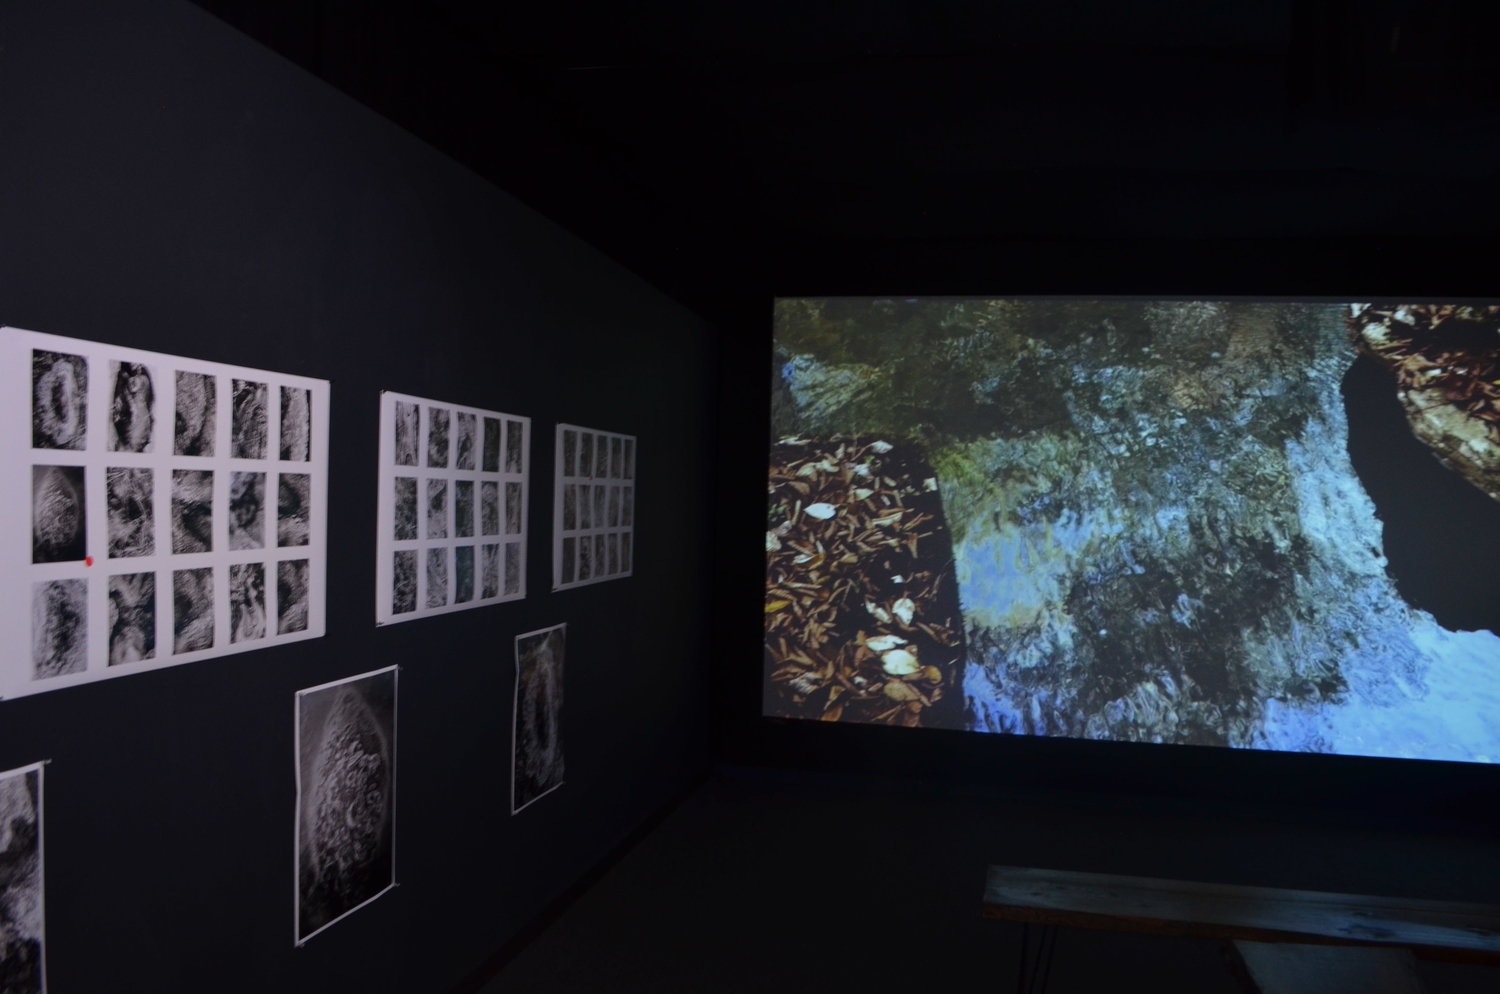 "Where I Live" examines the streams and woods of Marritz's property, with a slow-motion video loop and black-and-white photos of water and ice.